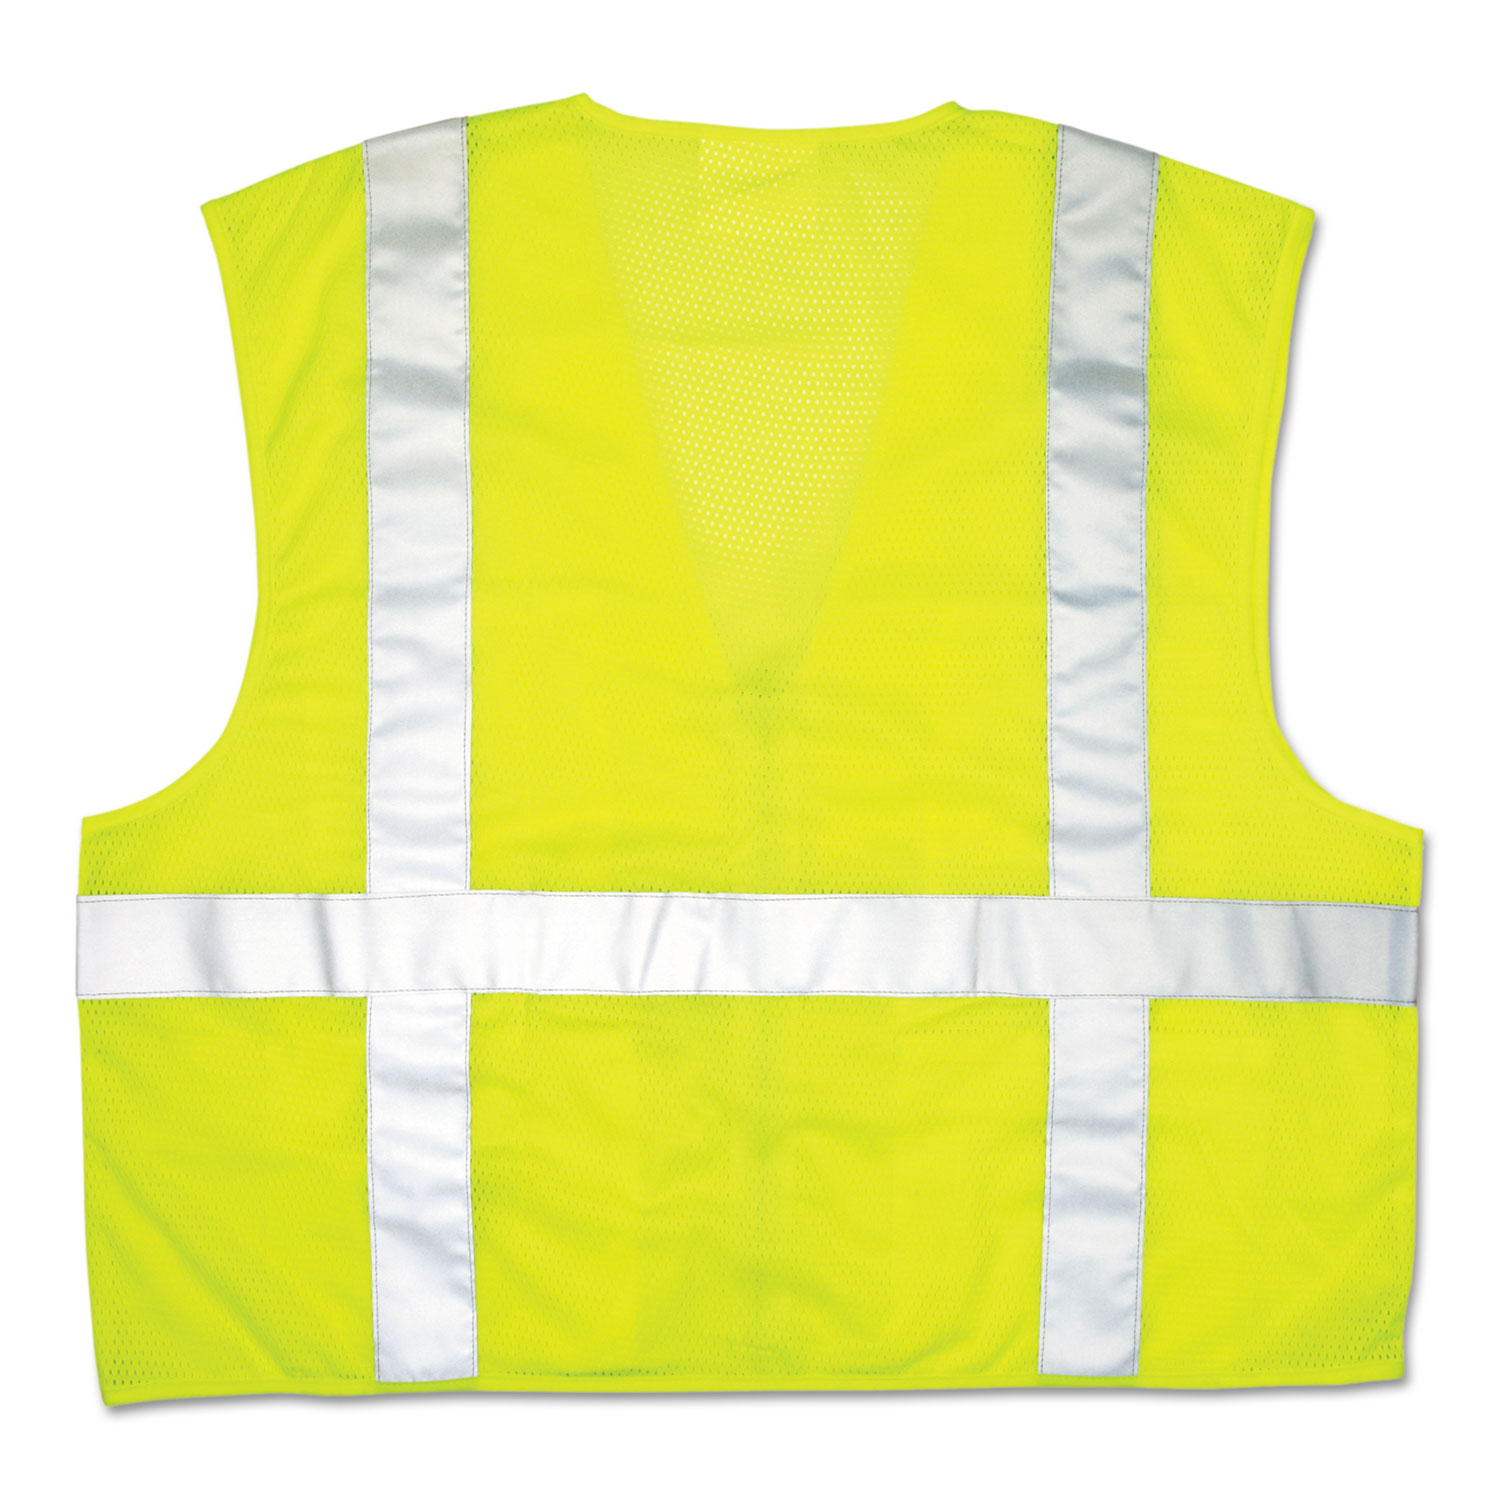  MCR Safety CL2LCL Luminator Safety Vest, Lime Green w/Stripe, Large (CRWCL2LCL) 